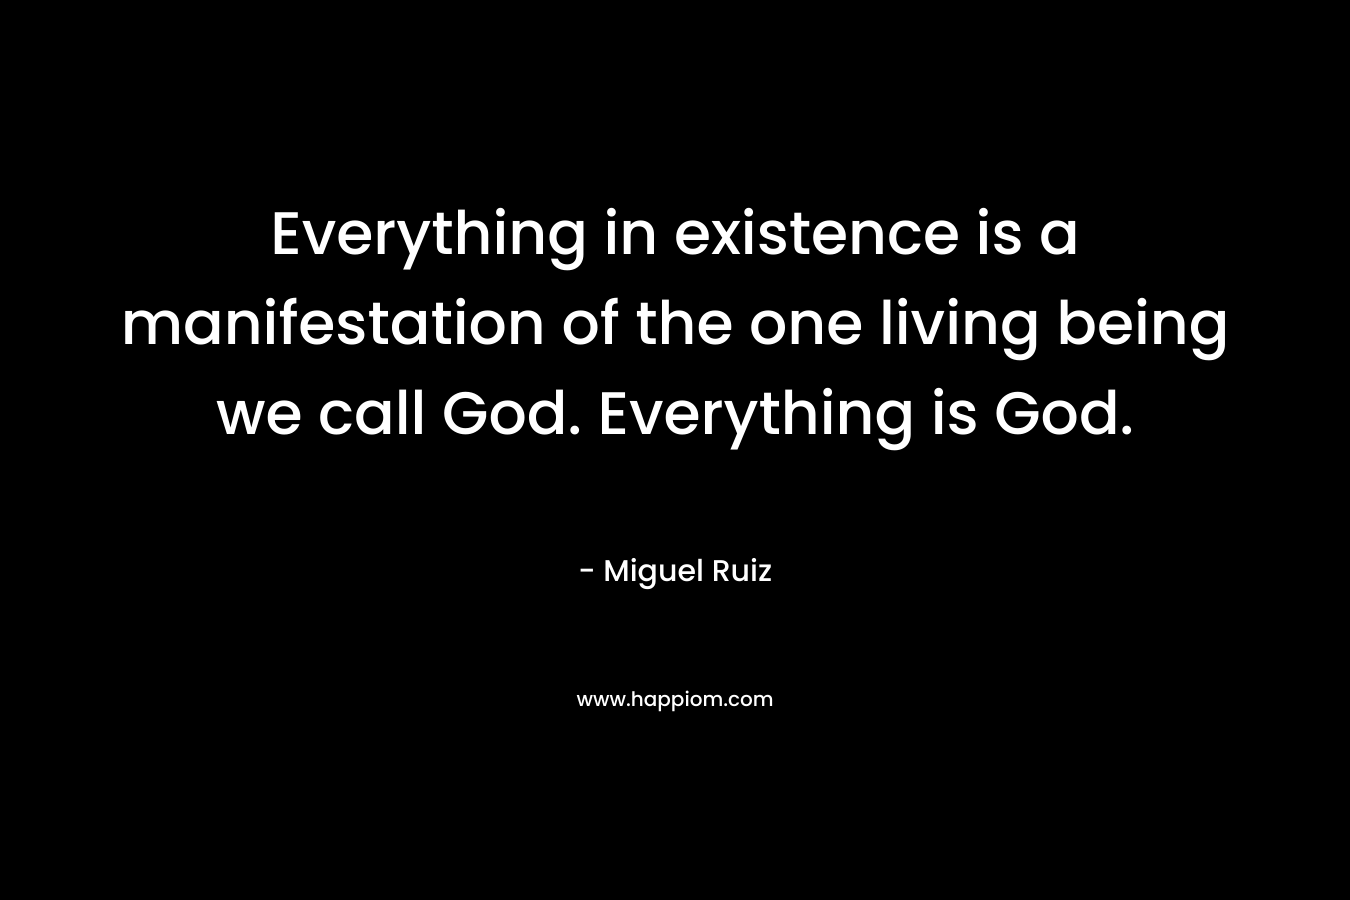 Everything in existence is a manifestation of the one living being we call God. Everything is God.